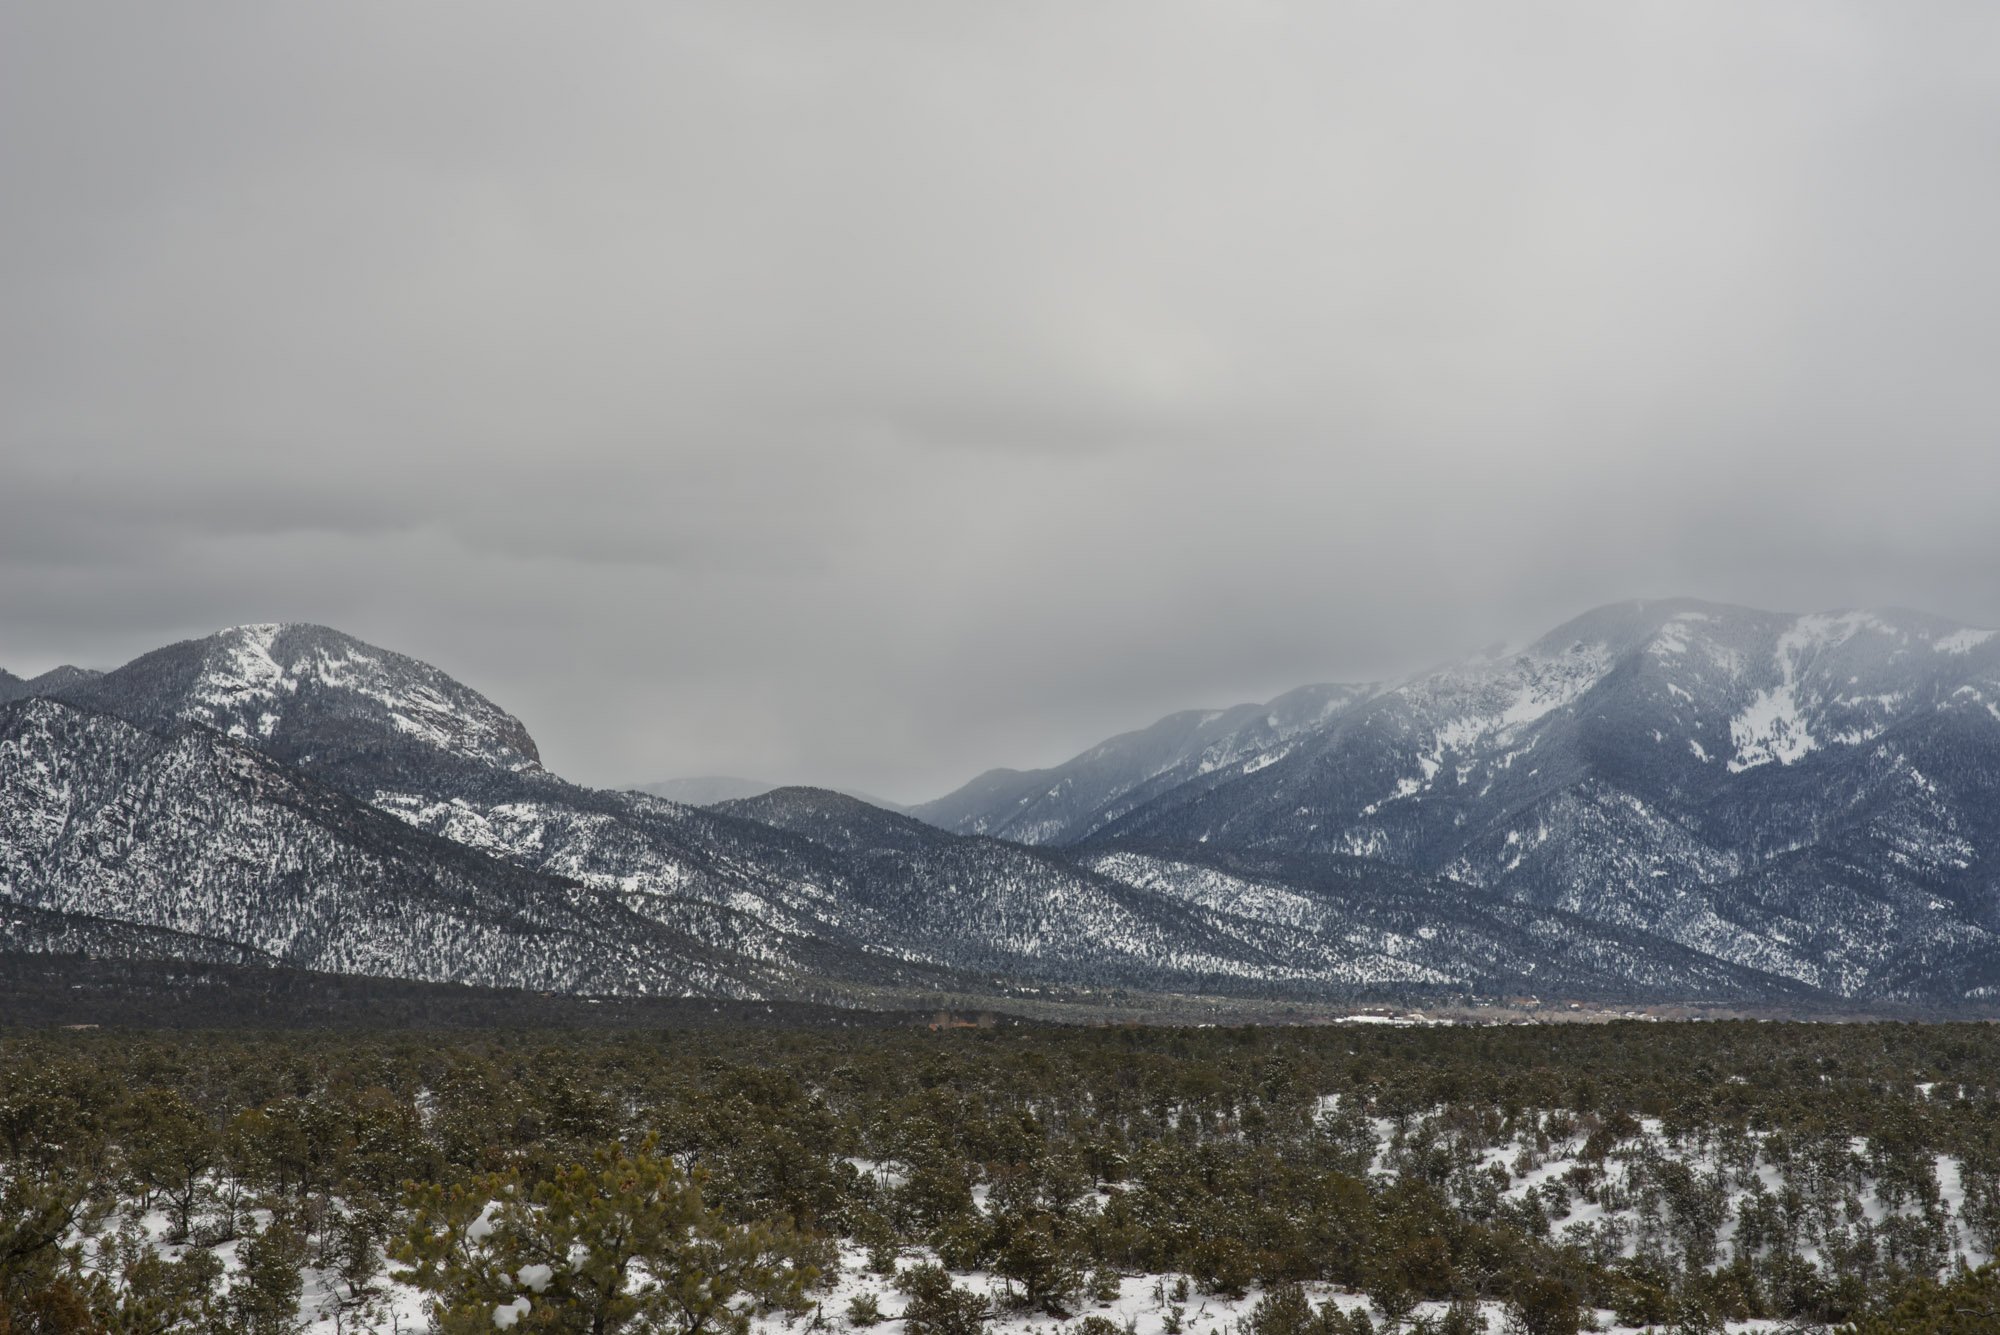   Late winter landscape in the Sangre de Cristo mountains, Lucero Peak and El Salto to the left, Taos Mountain and Taos Pueblo to the right.  